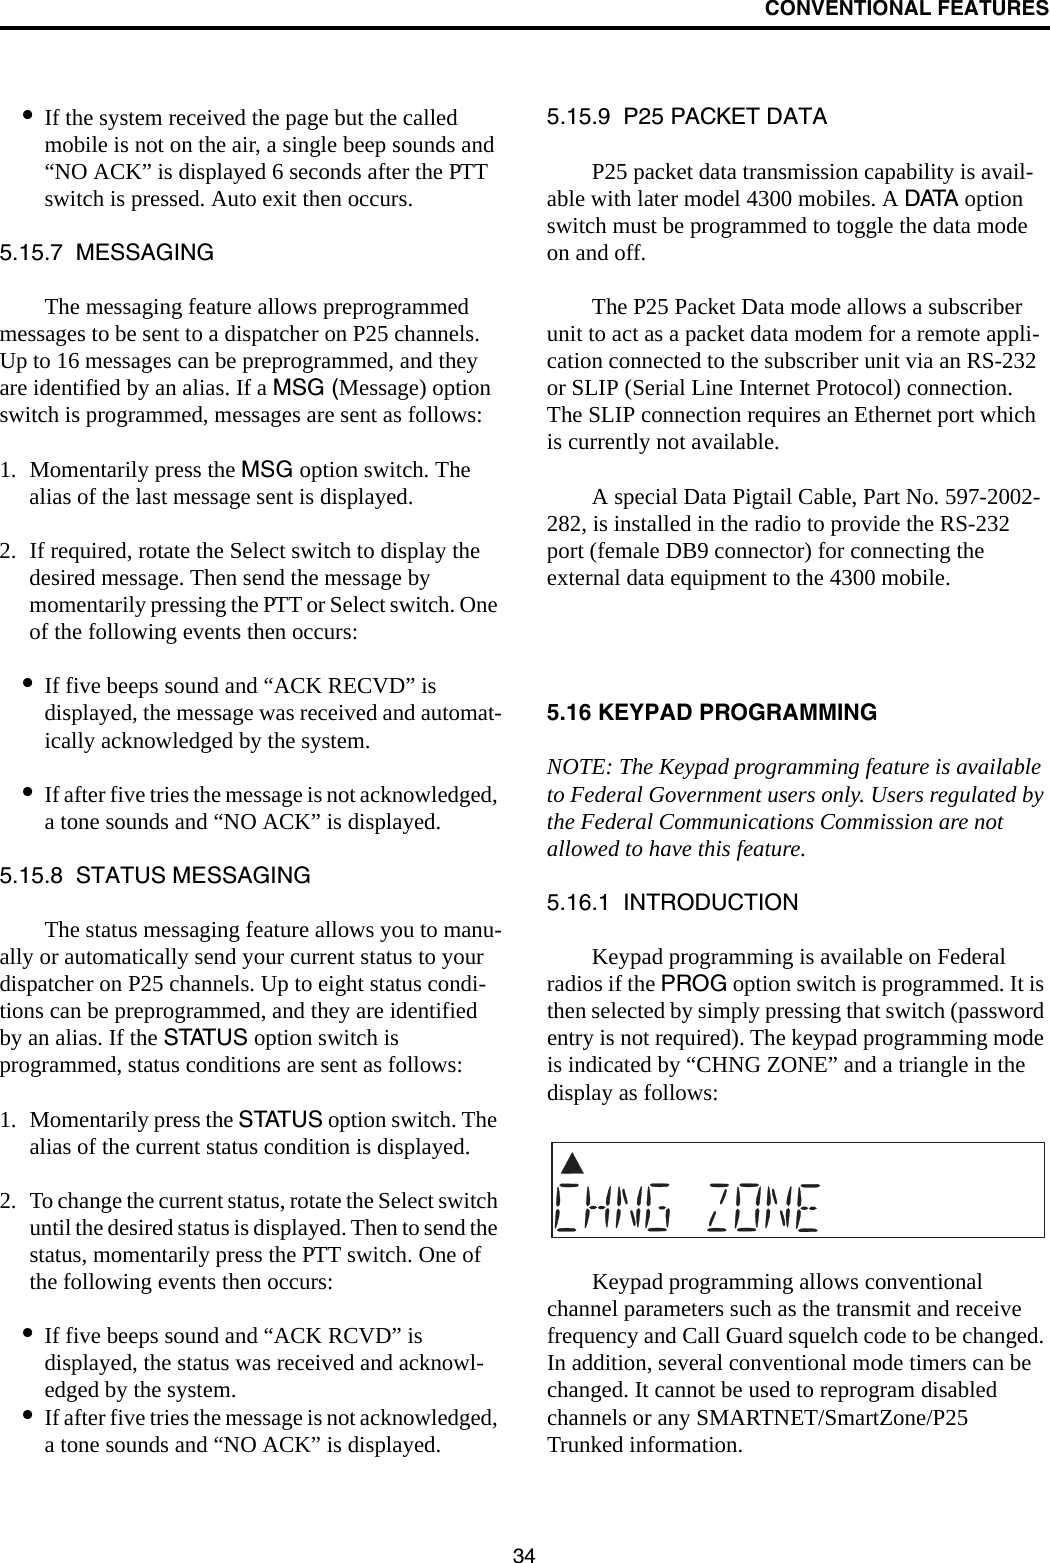 CONVENTIONAL FEATURES34•If the system received the page but the called mobile is not on the air, a single beep sounds and “NO ACK” is displayed 6 seconds after the PTT switch is pressed. Auto exit then occurs.5.15.7  MESSAGINGThe messaging feature allows preprogrammed messages to be sent to a dispatcher on P25 channels. Up to 16 messages can be preprogrammed, and they are identified by an alias. If a MSG (Message) option switch is programmed, messages are sent as follows:1. Momentarily press the MSG option switch. The alias of the last message sent is displayed.2. If required, rotate the Select switch to display the desired message. Then send the message by momentarily pressing the PTT or Select switch. One of the following events then occurs:•If five beeps sound and “ACK RECVD” is displayed, the message was received and automat-ically acknowledged by the system.•If after five tries the message is not acknowledged, a tone sounds and “NO ACK” is displayed. 5.15.8  STATUS MESSAGINGThe status messaging feature allows you to manu-ally or automatically send your current status to your dispatcher on P25 channels. Up to eight status condi-tions can be preprogrammed, and they are identified by an alias. If the STATUS option switch is programmed, status conditions are sent as follows:1. Momentarily press the STATUS option switch. The alias of the current status condition is displayed.2. To change the current status, rotate the Select switch until the desired status is displayed. Then to send the status, momentarily press the PTT switch. One of the following events then occurs:•If five beeps sound and “ACK RCVD” is displayed, the status was received and acknowl-edged by the system.•If after five tries the message is not acknowledged, a tone sounds and “NO ACK” is displayed. 5.15.9  P25 PACKET DATAP25 packet data transmission capability is avail-able with later model 4300 mobiles. A DATA option switch must be programmed to toggle the data mode on and off. The P25 Packet Data mode allows a subscriber unit to act as a packet data modem for a remote appli-cation connected to the subscriber unit via an RS-232 or SLIP (Serial Line Internet Protocol) connection. The SLIP connection requires an Ethernet port which is currently not available.A special Data Pigtail Cable, Part No. 597-2002-282, is installed in the radio to provide the RS-232 port (female DB9 connector) for connecting the external data equipment to the 4300 mobile. 5.16 KEYPAD PROGRAMMINGNOTE: The Keypad programming feature is available to Federal Government users only. Users regulated by the Federal Communications Commission are not allowed to have this feature. 5.16.1  INTRODUCTIONKeypad programming is available on Federal radios if the PROG option switch is programmed. It is then selected by simply pressing that switch (password entry is not required). The keypad programming mode is indicated by “CHNG ZONE” and a triangle in the display as follows:Keypad programming allows conventional channel parameters such as the transmit and receive frequency and Call Guard squelch code to be changed. In addition, several conventional mode timers can be changed. It cannot be used to reprogram disabled channels or any SMARTNET/SmartZone/P25 Trunked information.